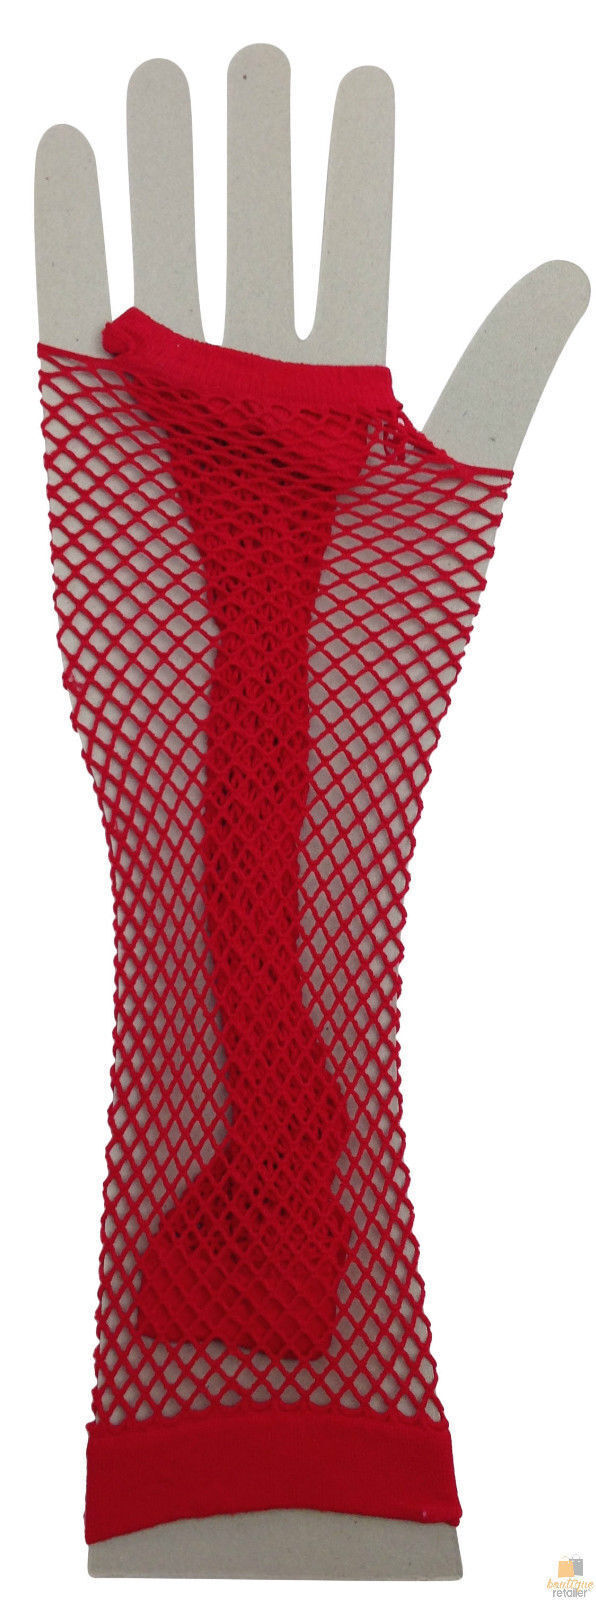 FISHNET GLOVES Fingerless Elbow Length 70s 80s Womens Costume Party Dance - Red - One Size